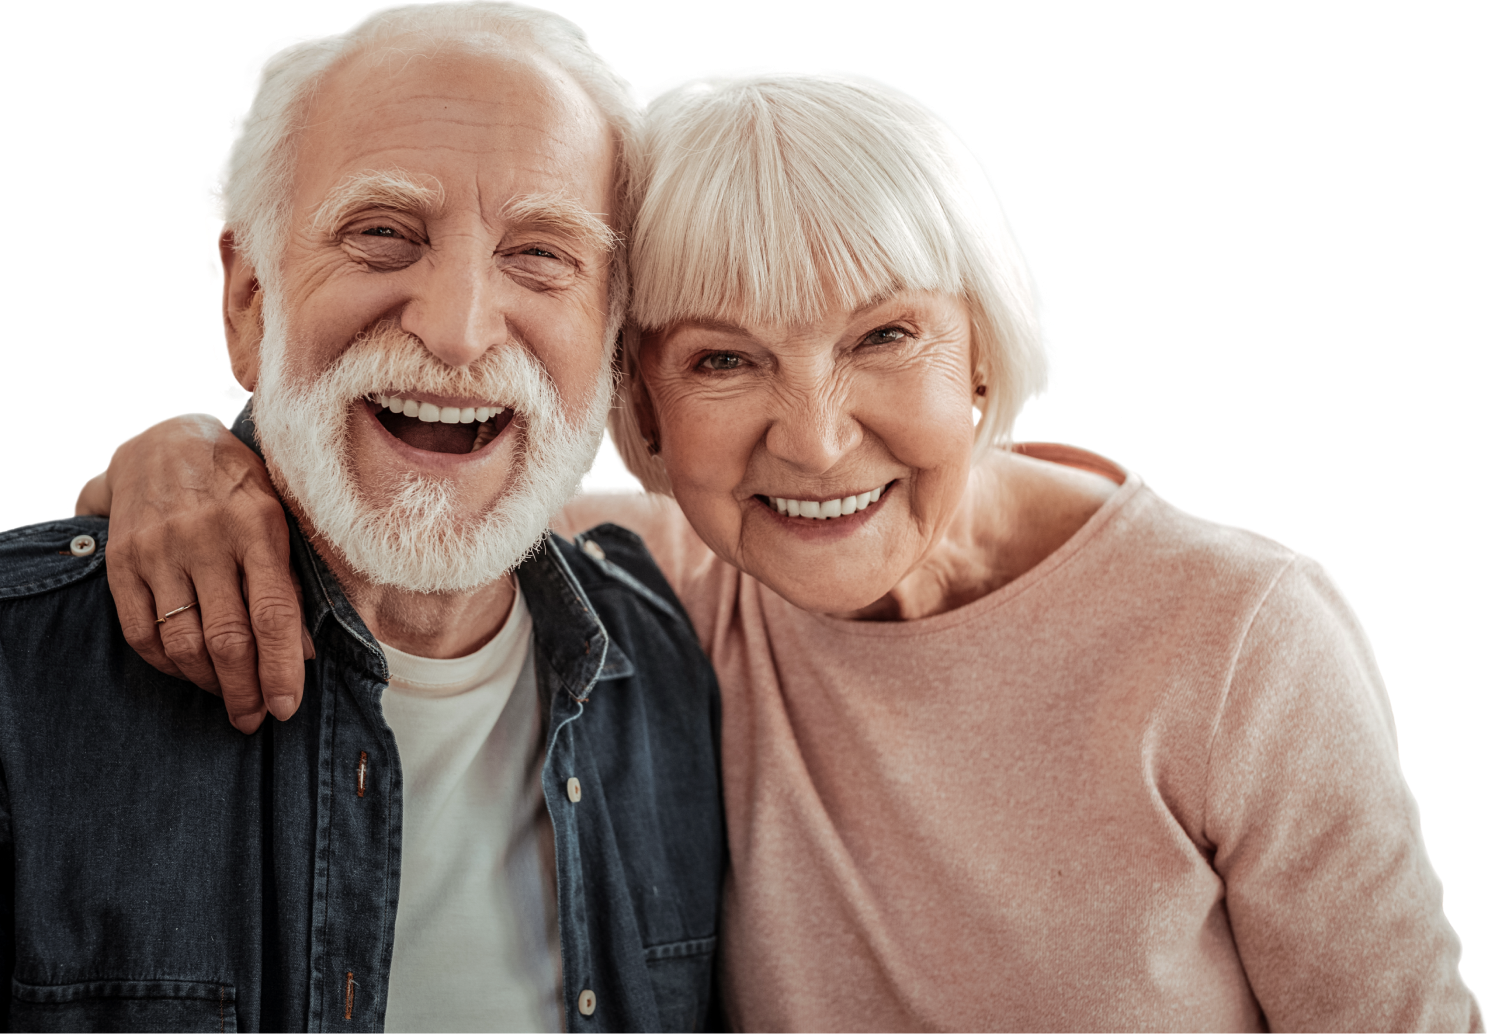 An elderly man and woman smiling together